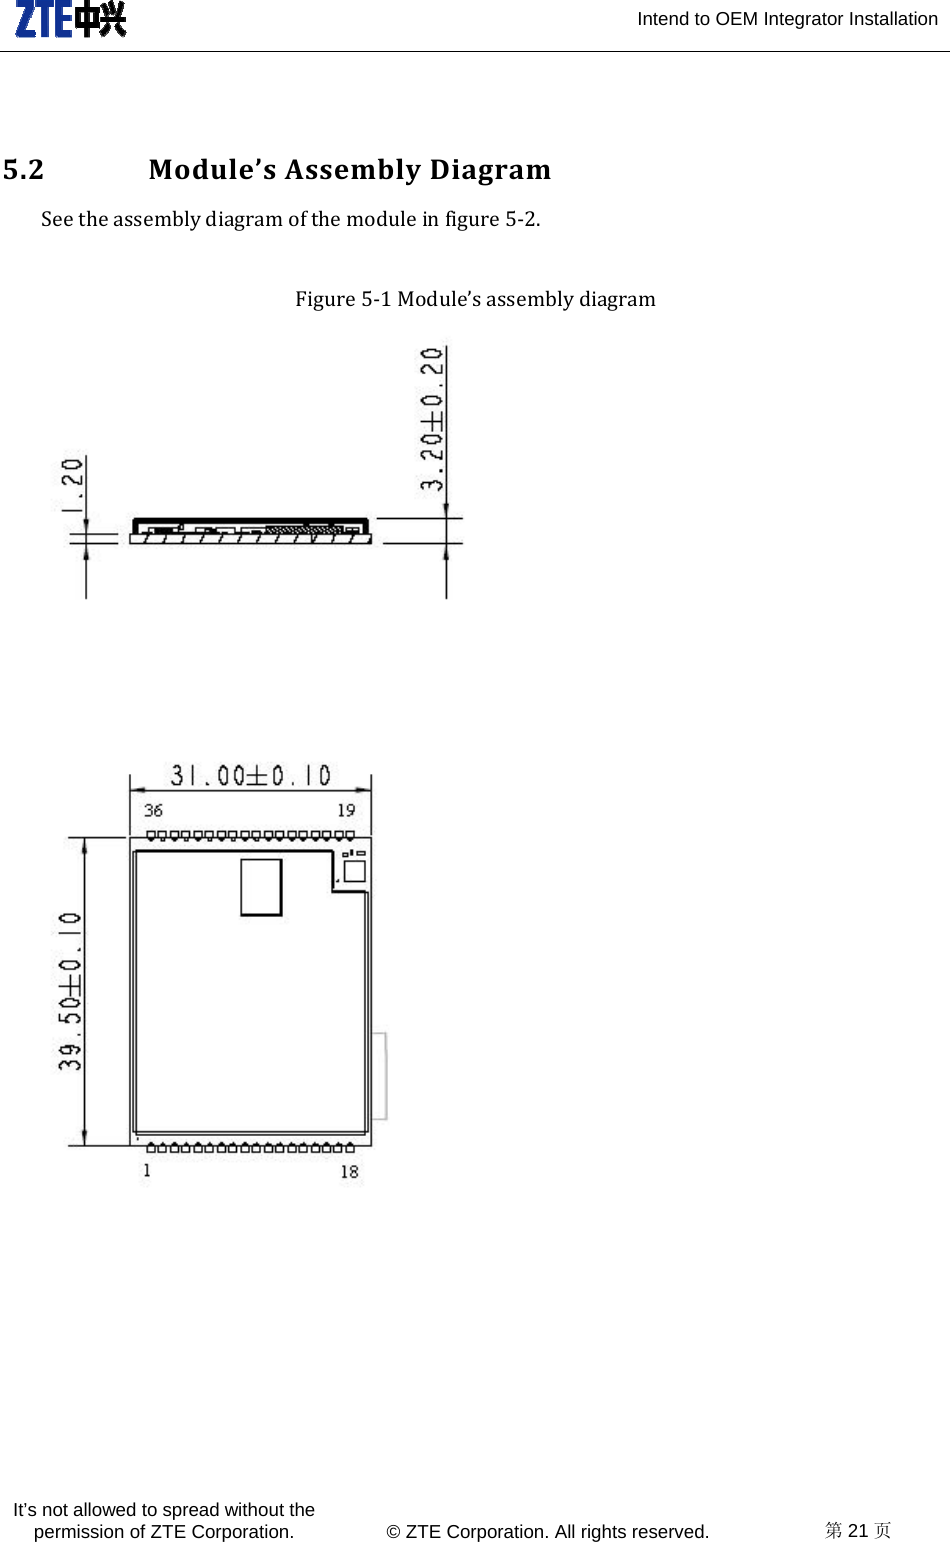  Intend to OEM Integrator Installation It’s not allowed to spread without the permission of ZTE Corporation.  © ZTE Corporation. All rights reserved.  第21 页  5.2 Module’sAssemblyDiagram Seetheassemblydiagramofthemoduleinfigure5‐2.Figure5‐1Module’sassemblydiagram